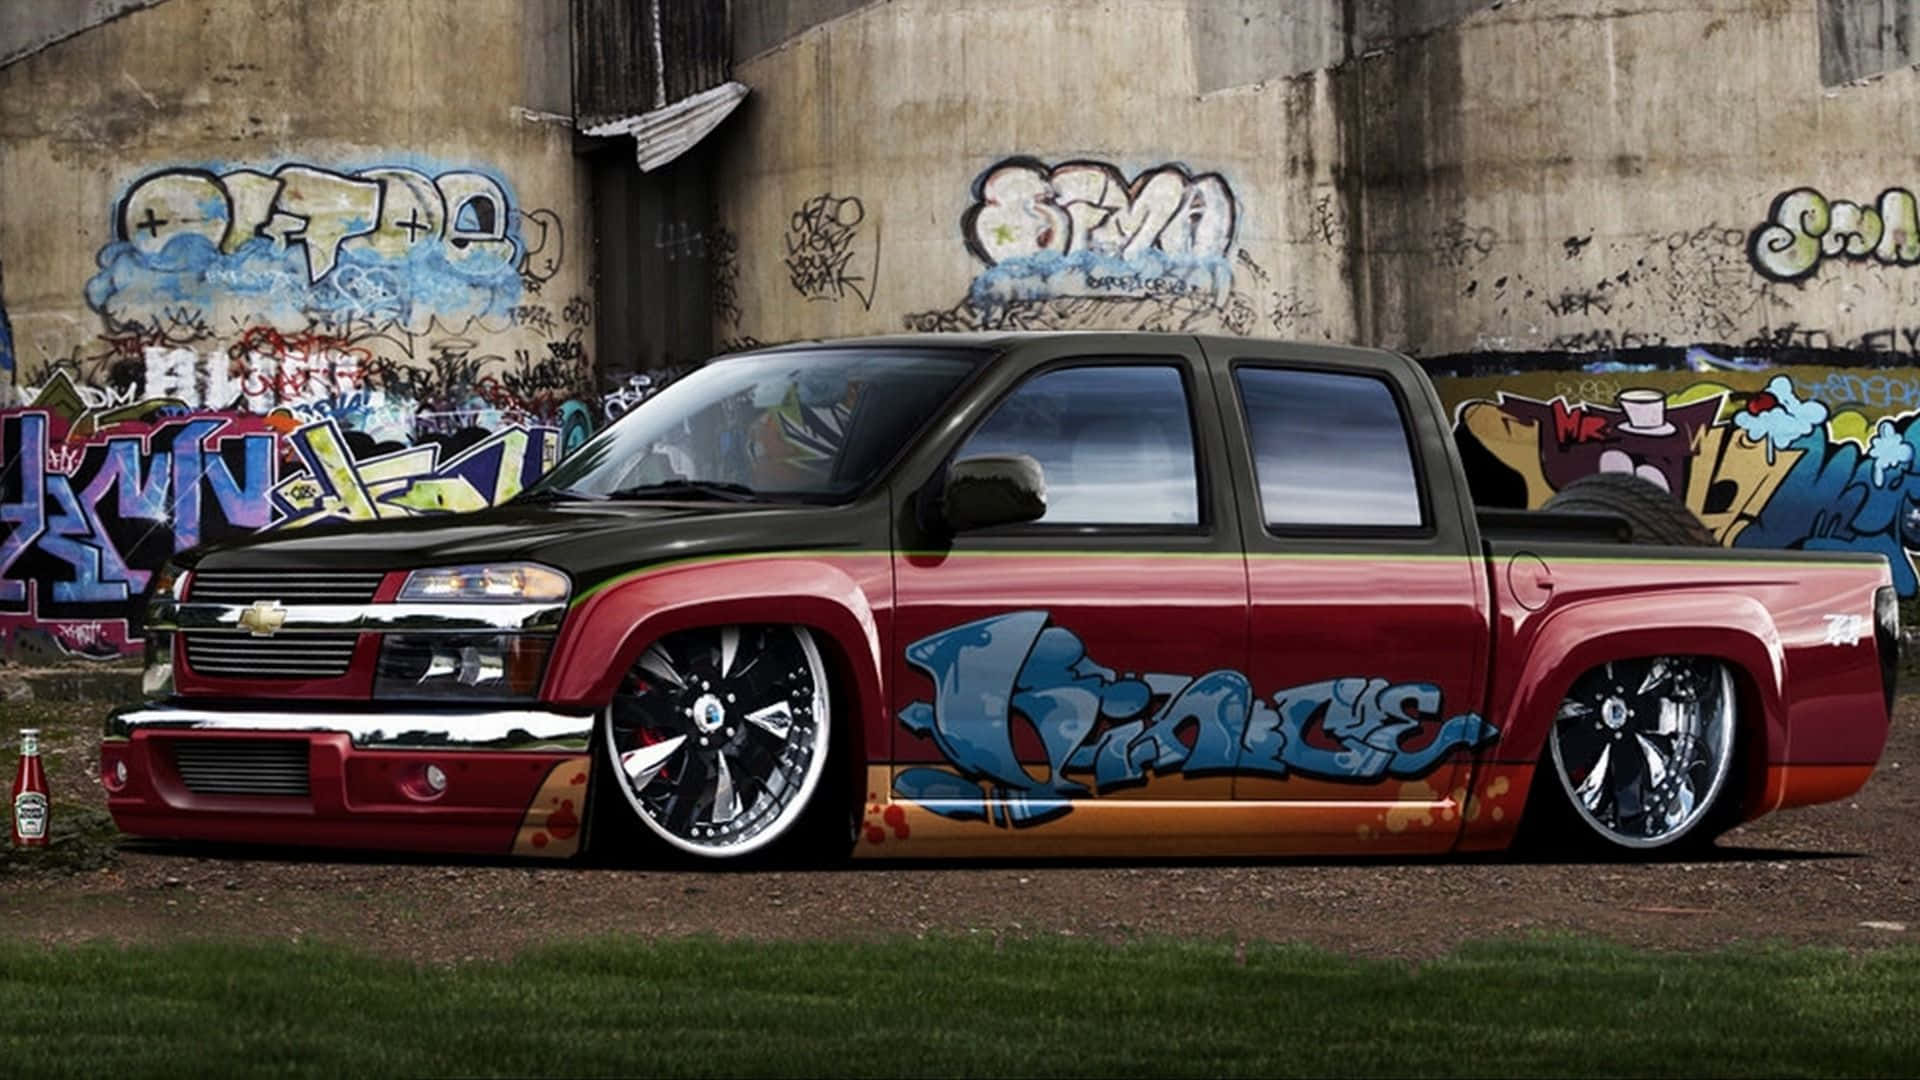 A Red And Black Truck With Graffiti On It Wallpaper